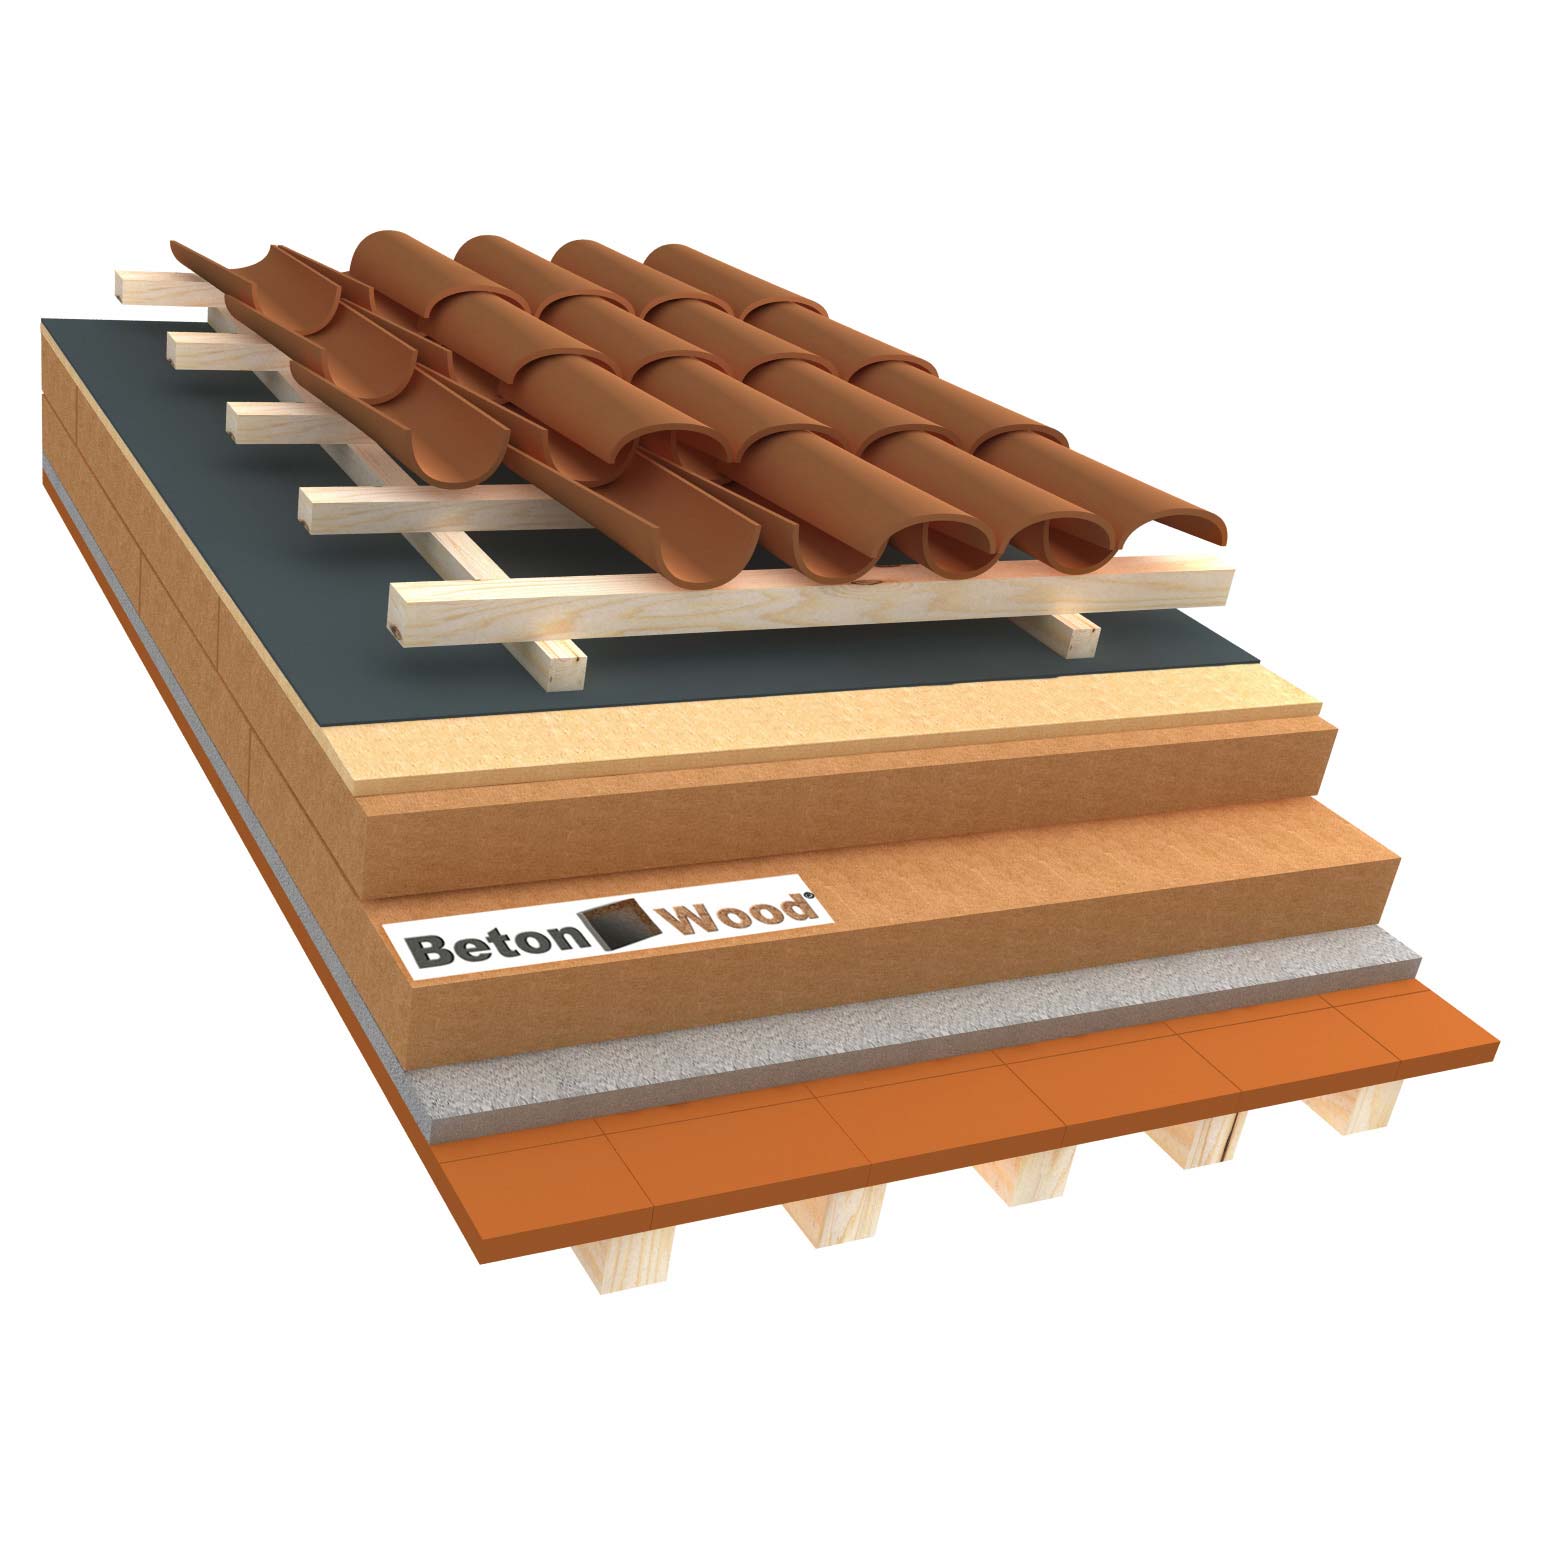 Ventilated roof with fiber wood Isorel and Universal dry on terracotta tiles